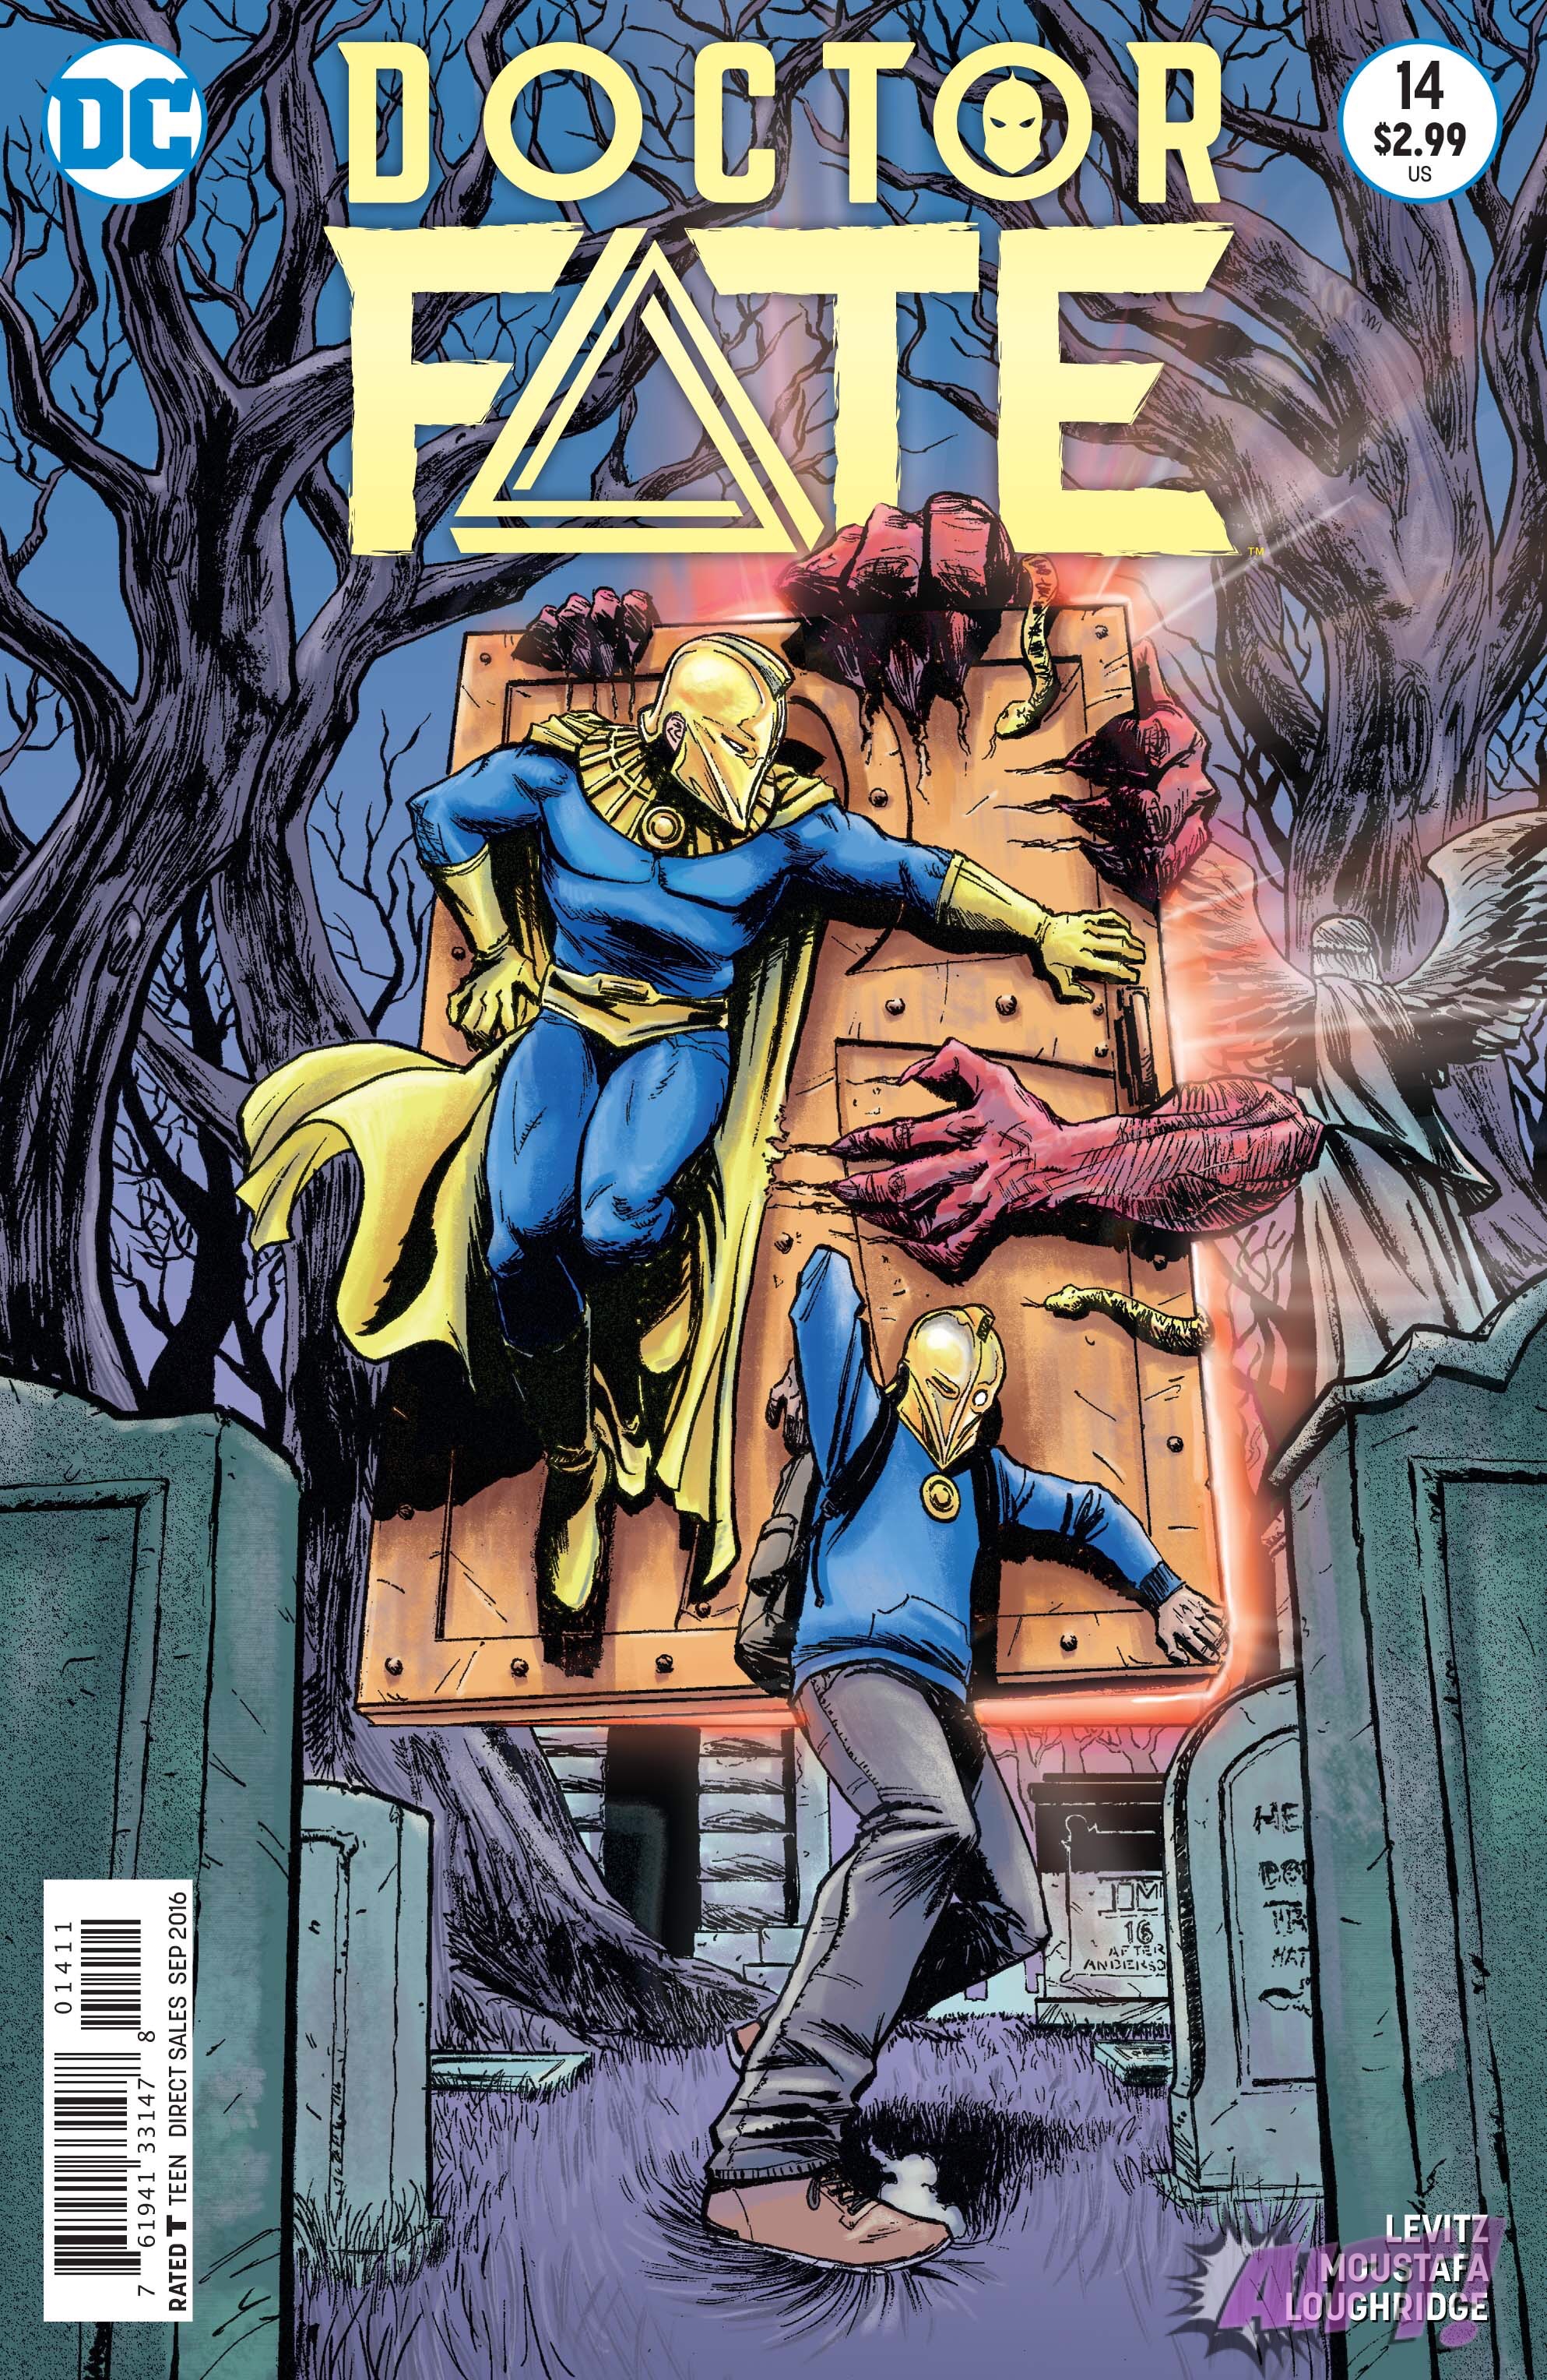 Doctor Fate #14 Review